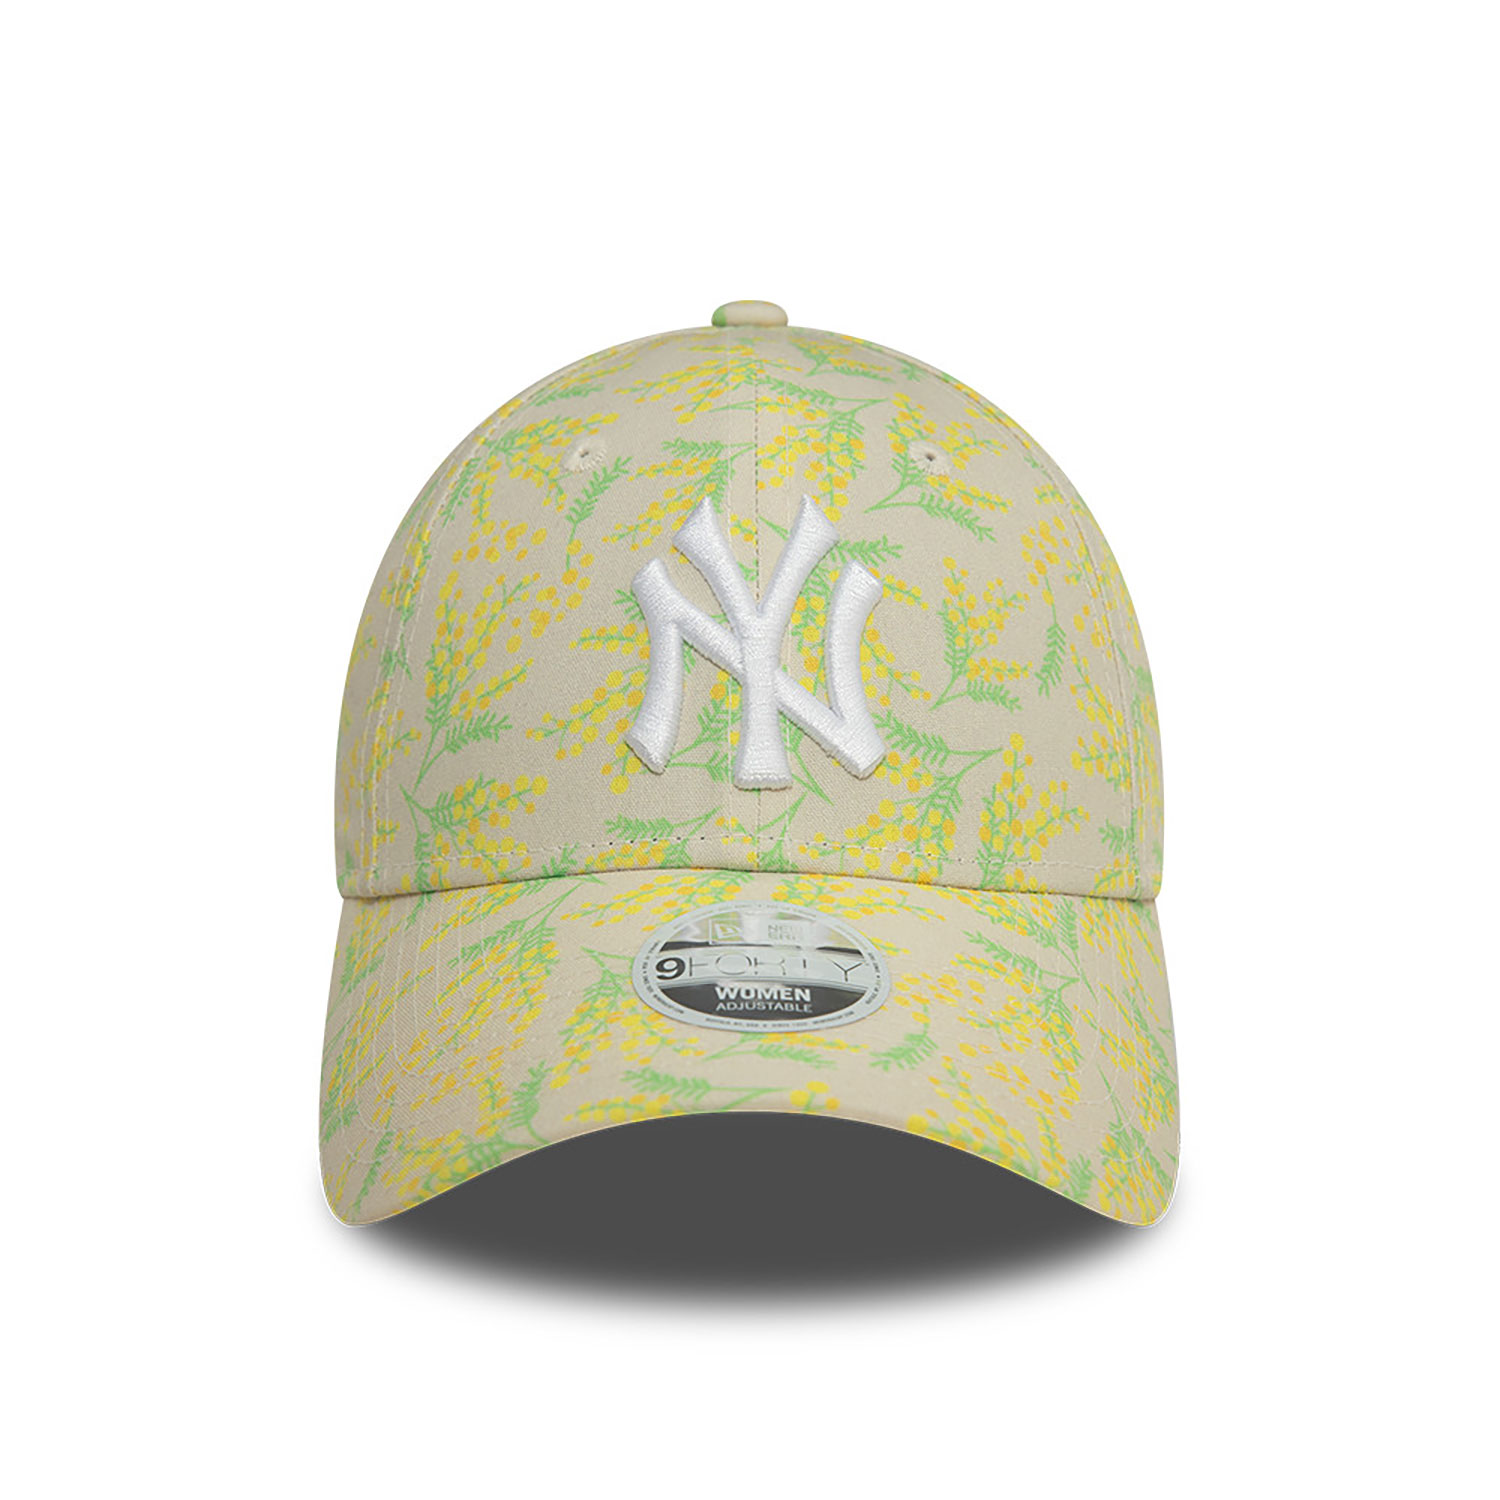 New York Yankees Womens Mimosa All Over Print Light Beige 9FORTY Adjustable Cap